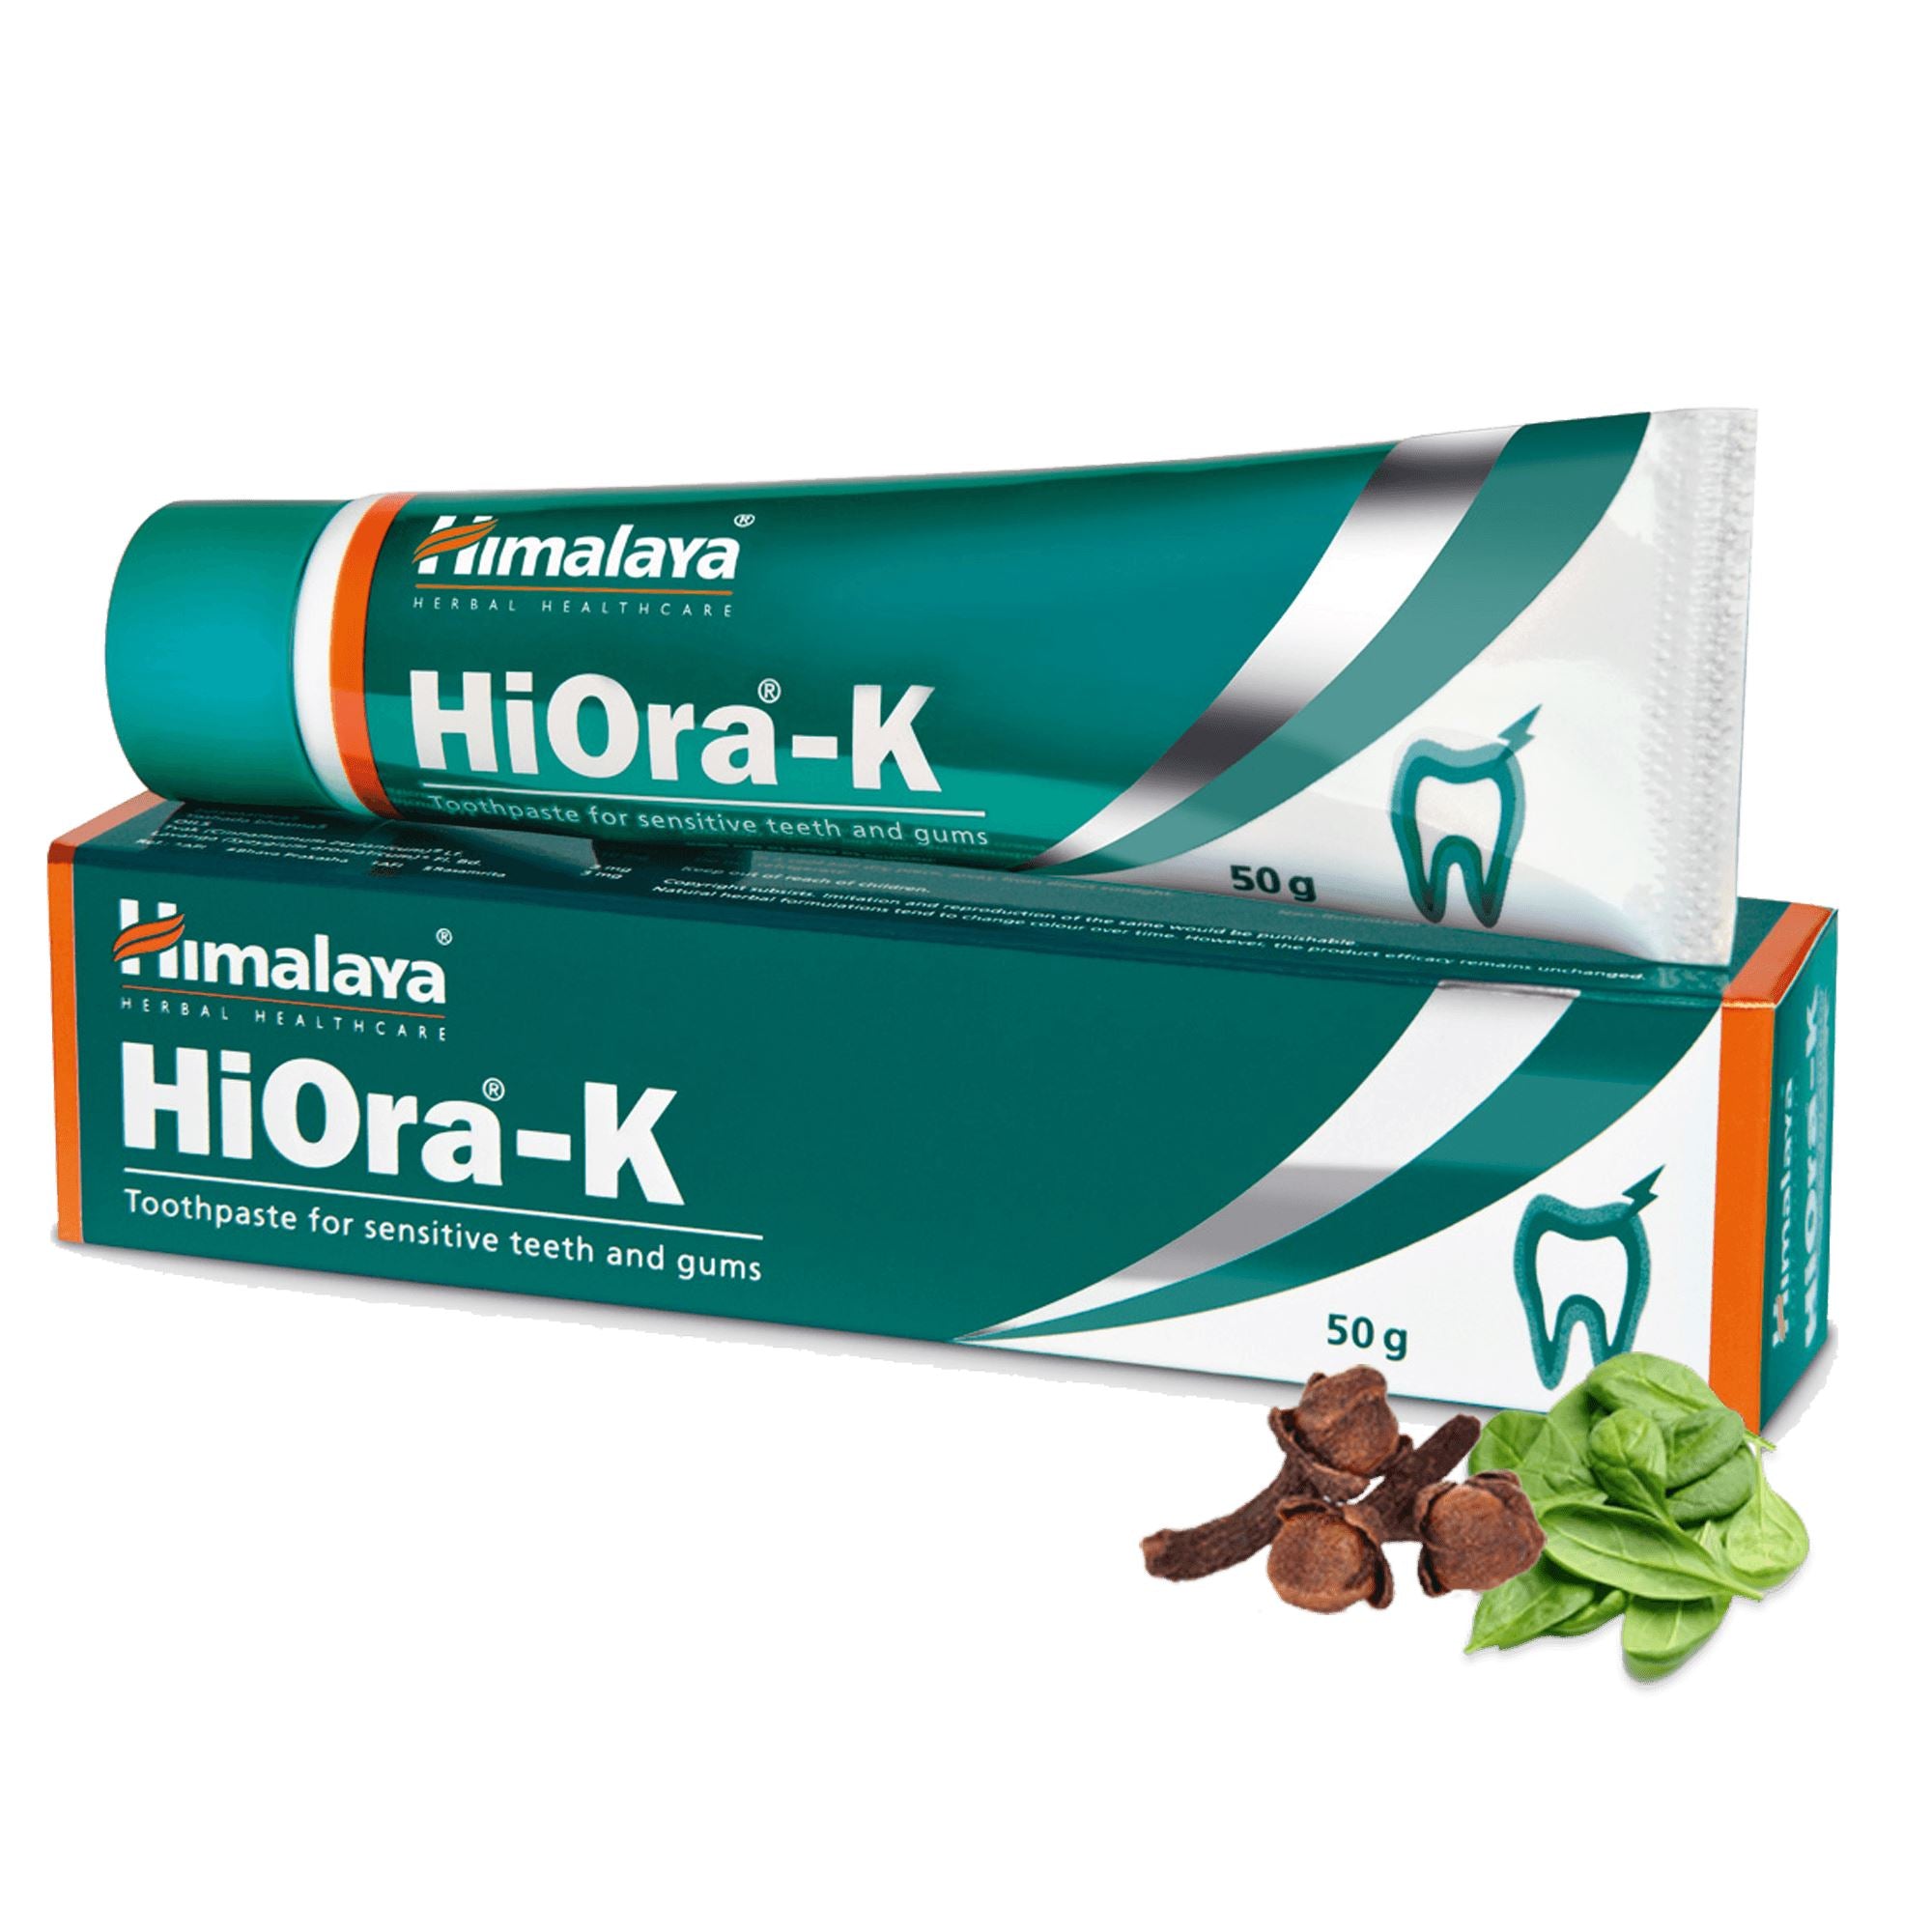 Himalaya Hiora-K Toothpaste - Toothpaste for sensitive teeth and gums